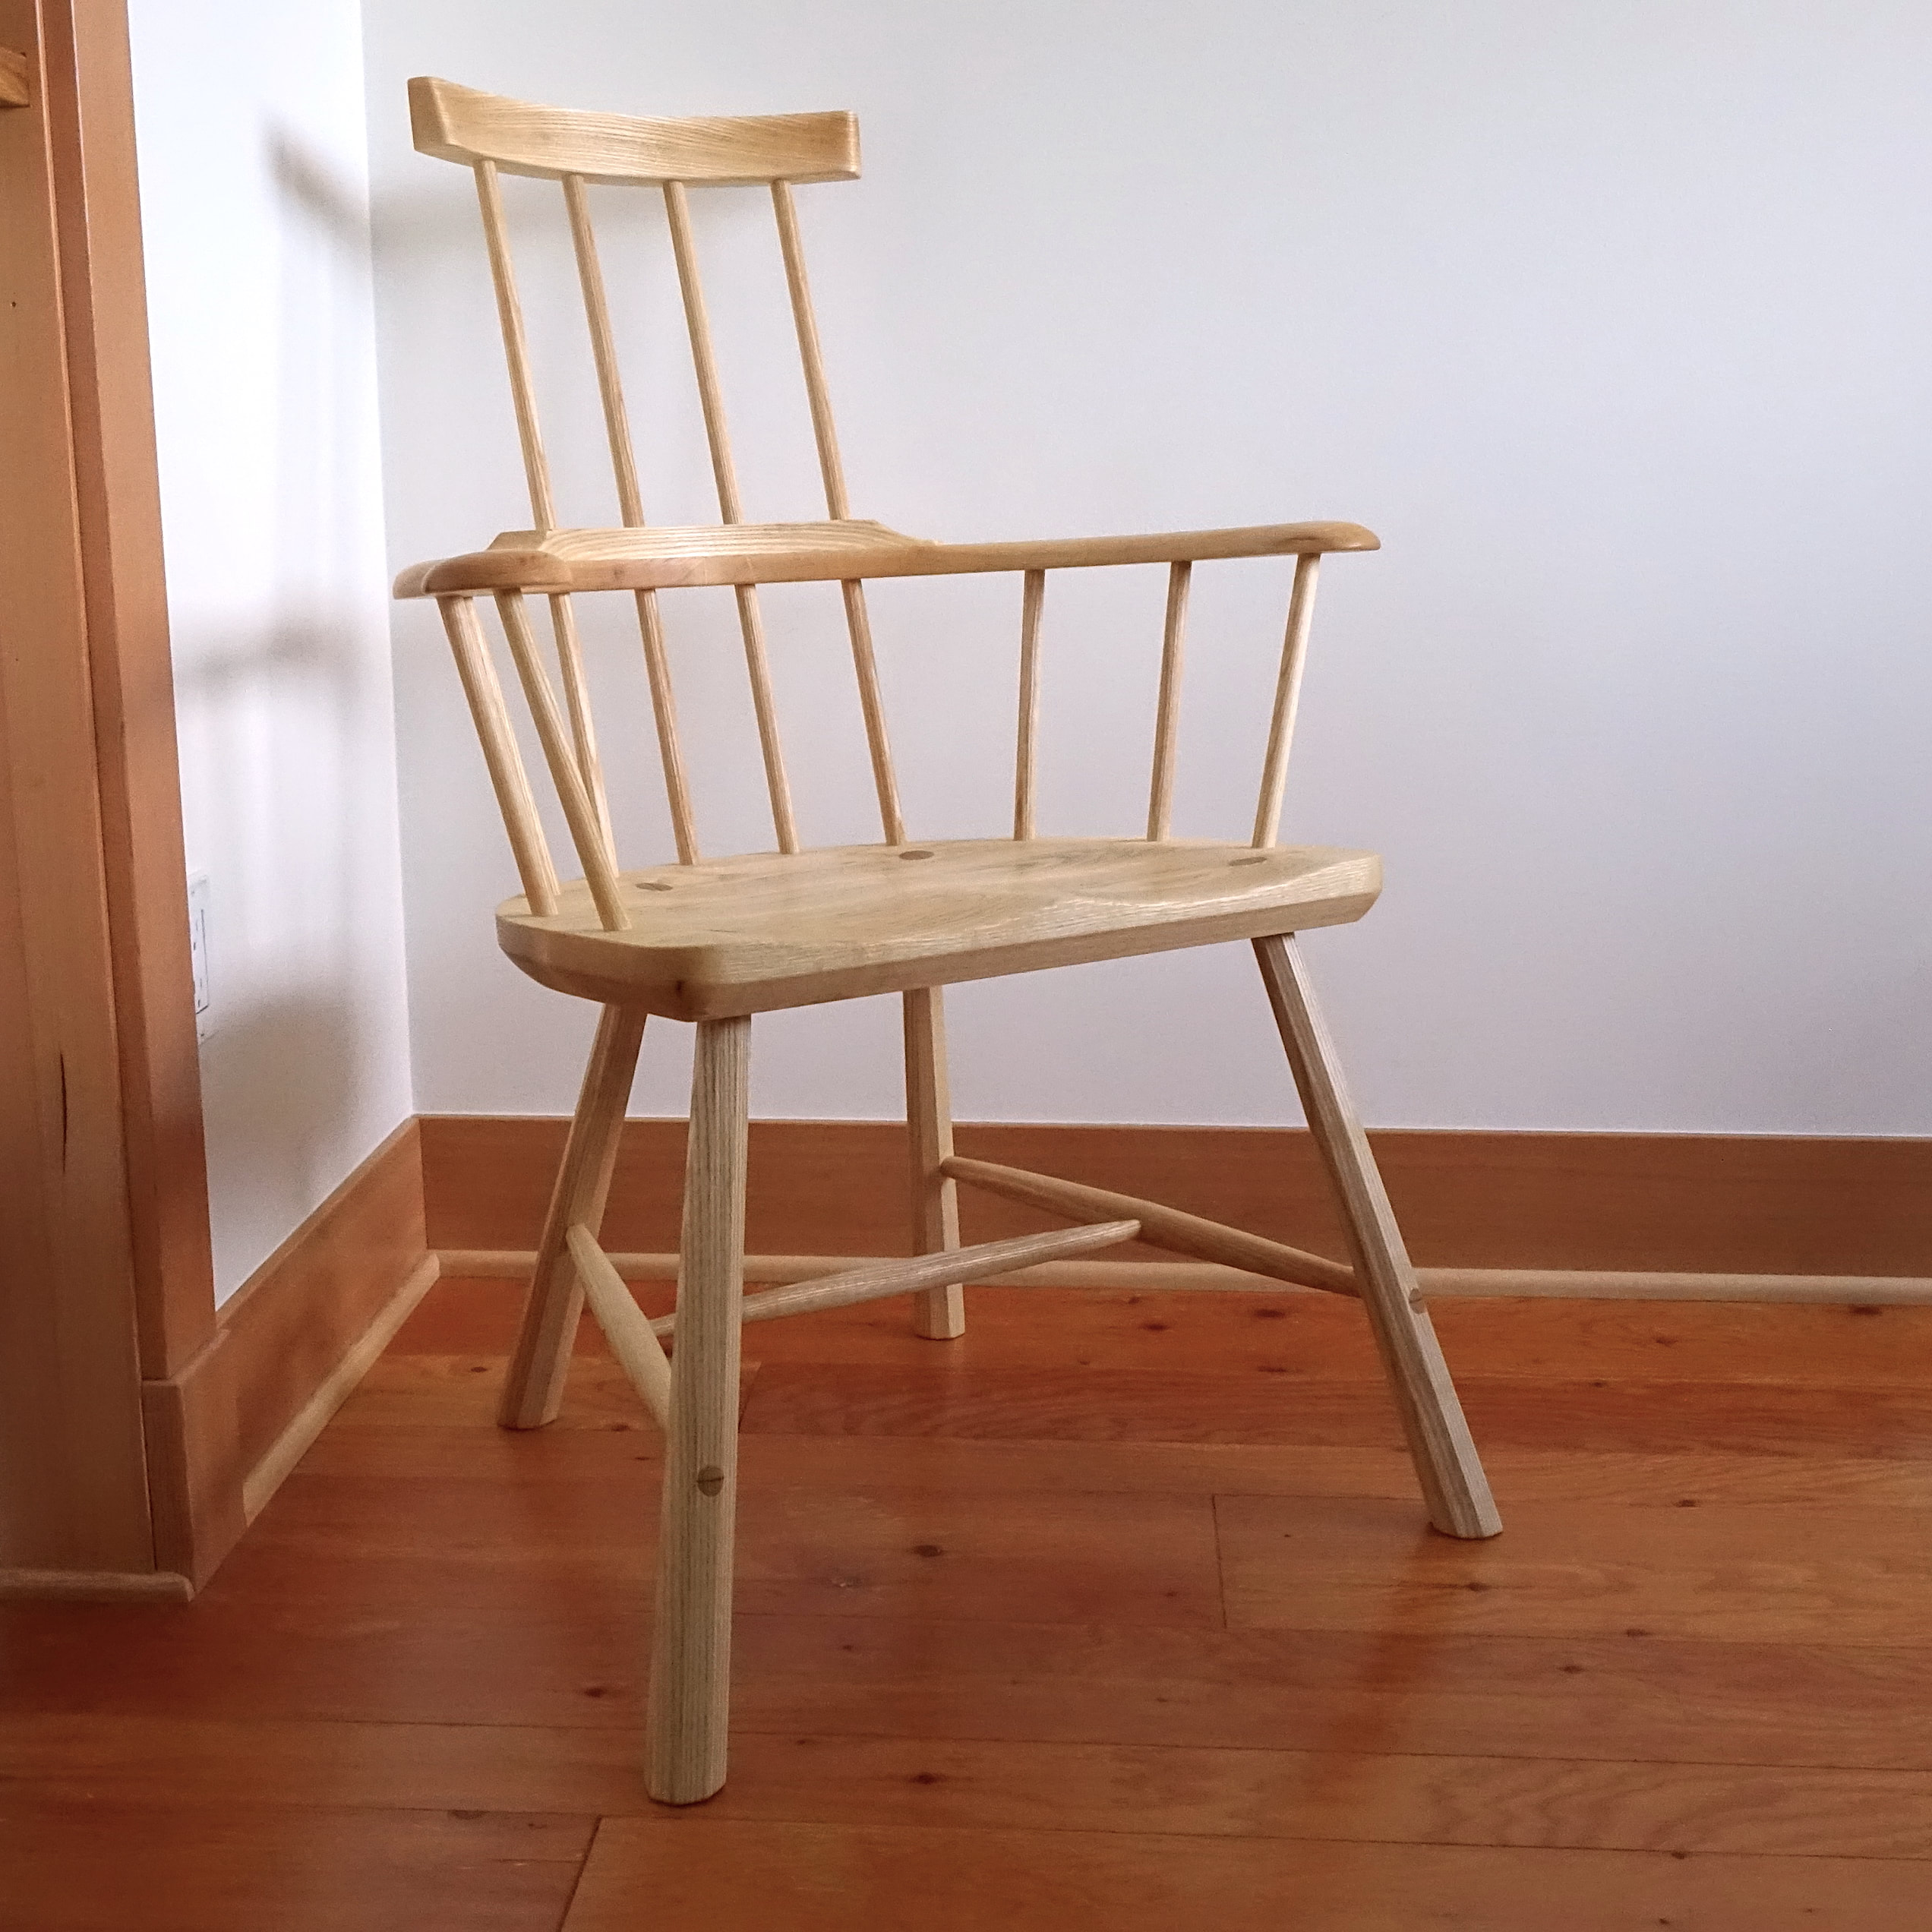 CW Welsh Stick Chair